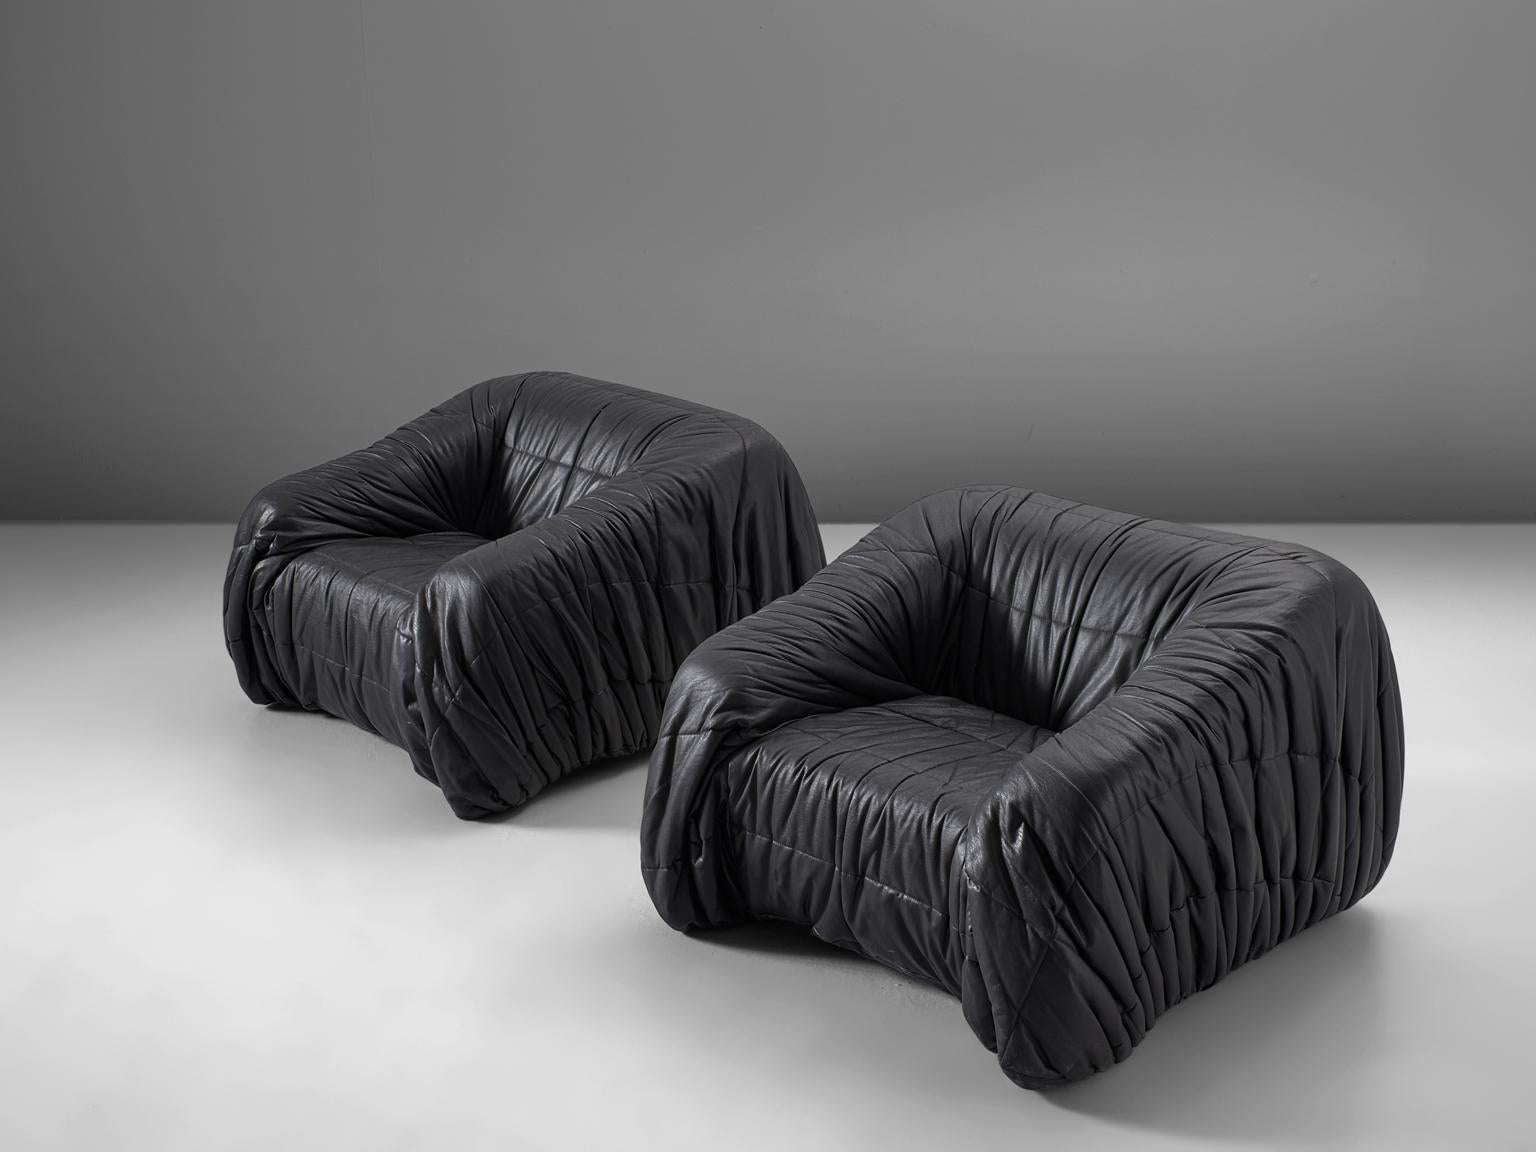 Italian De Pas, D'urbino and Lomazzi Pair of Lounge Chairs in Black Leatherette